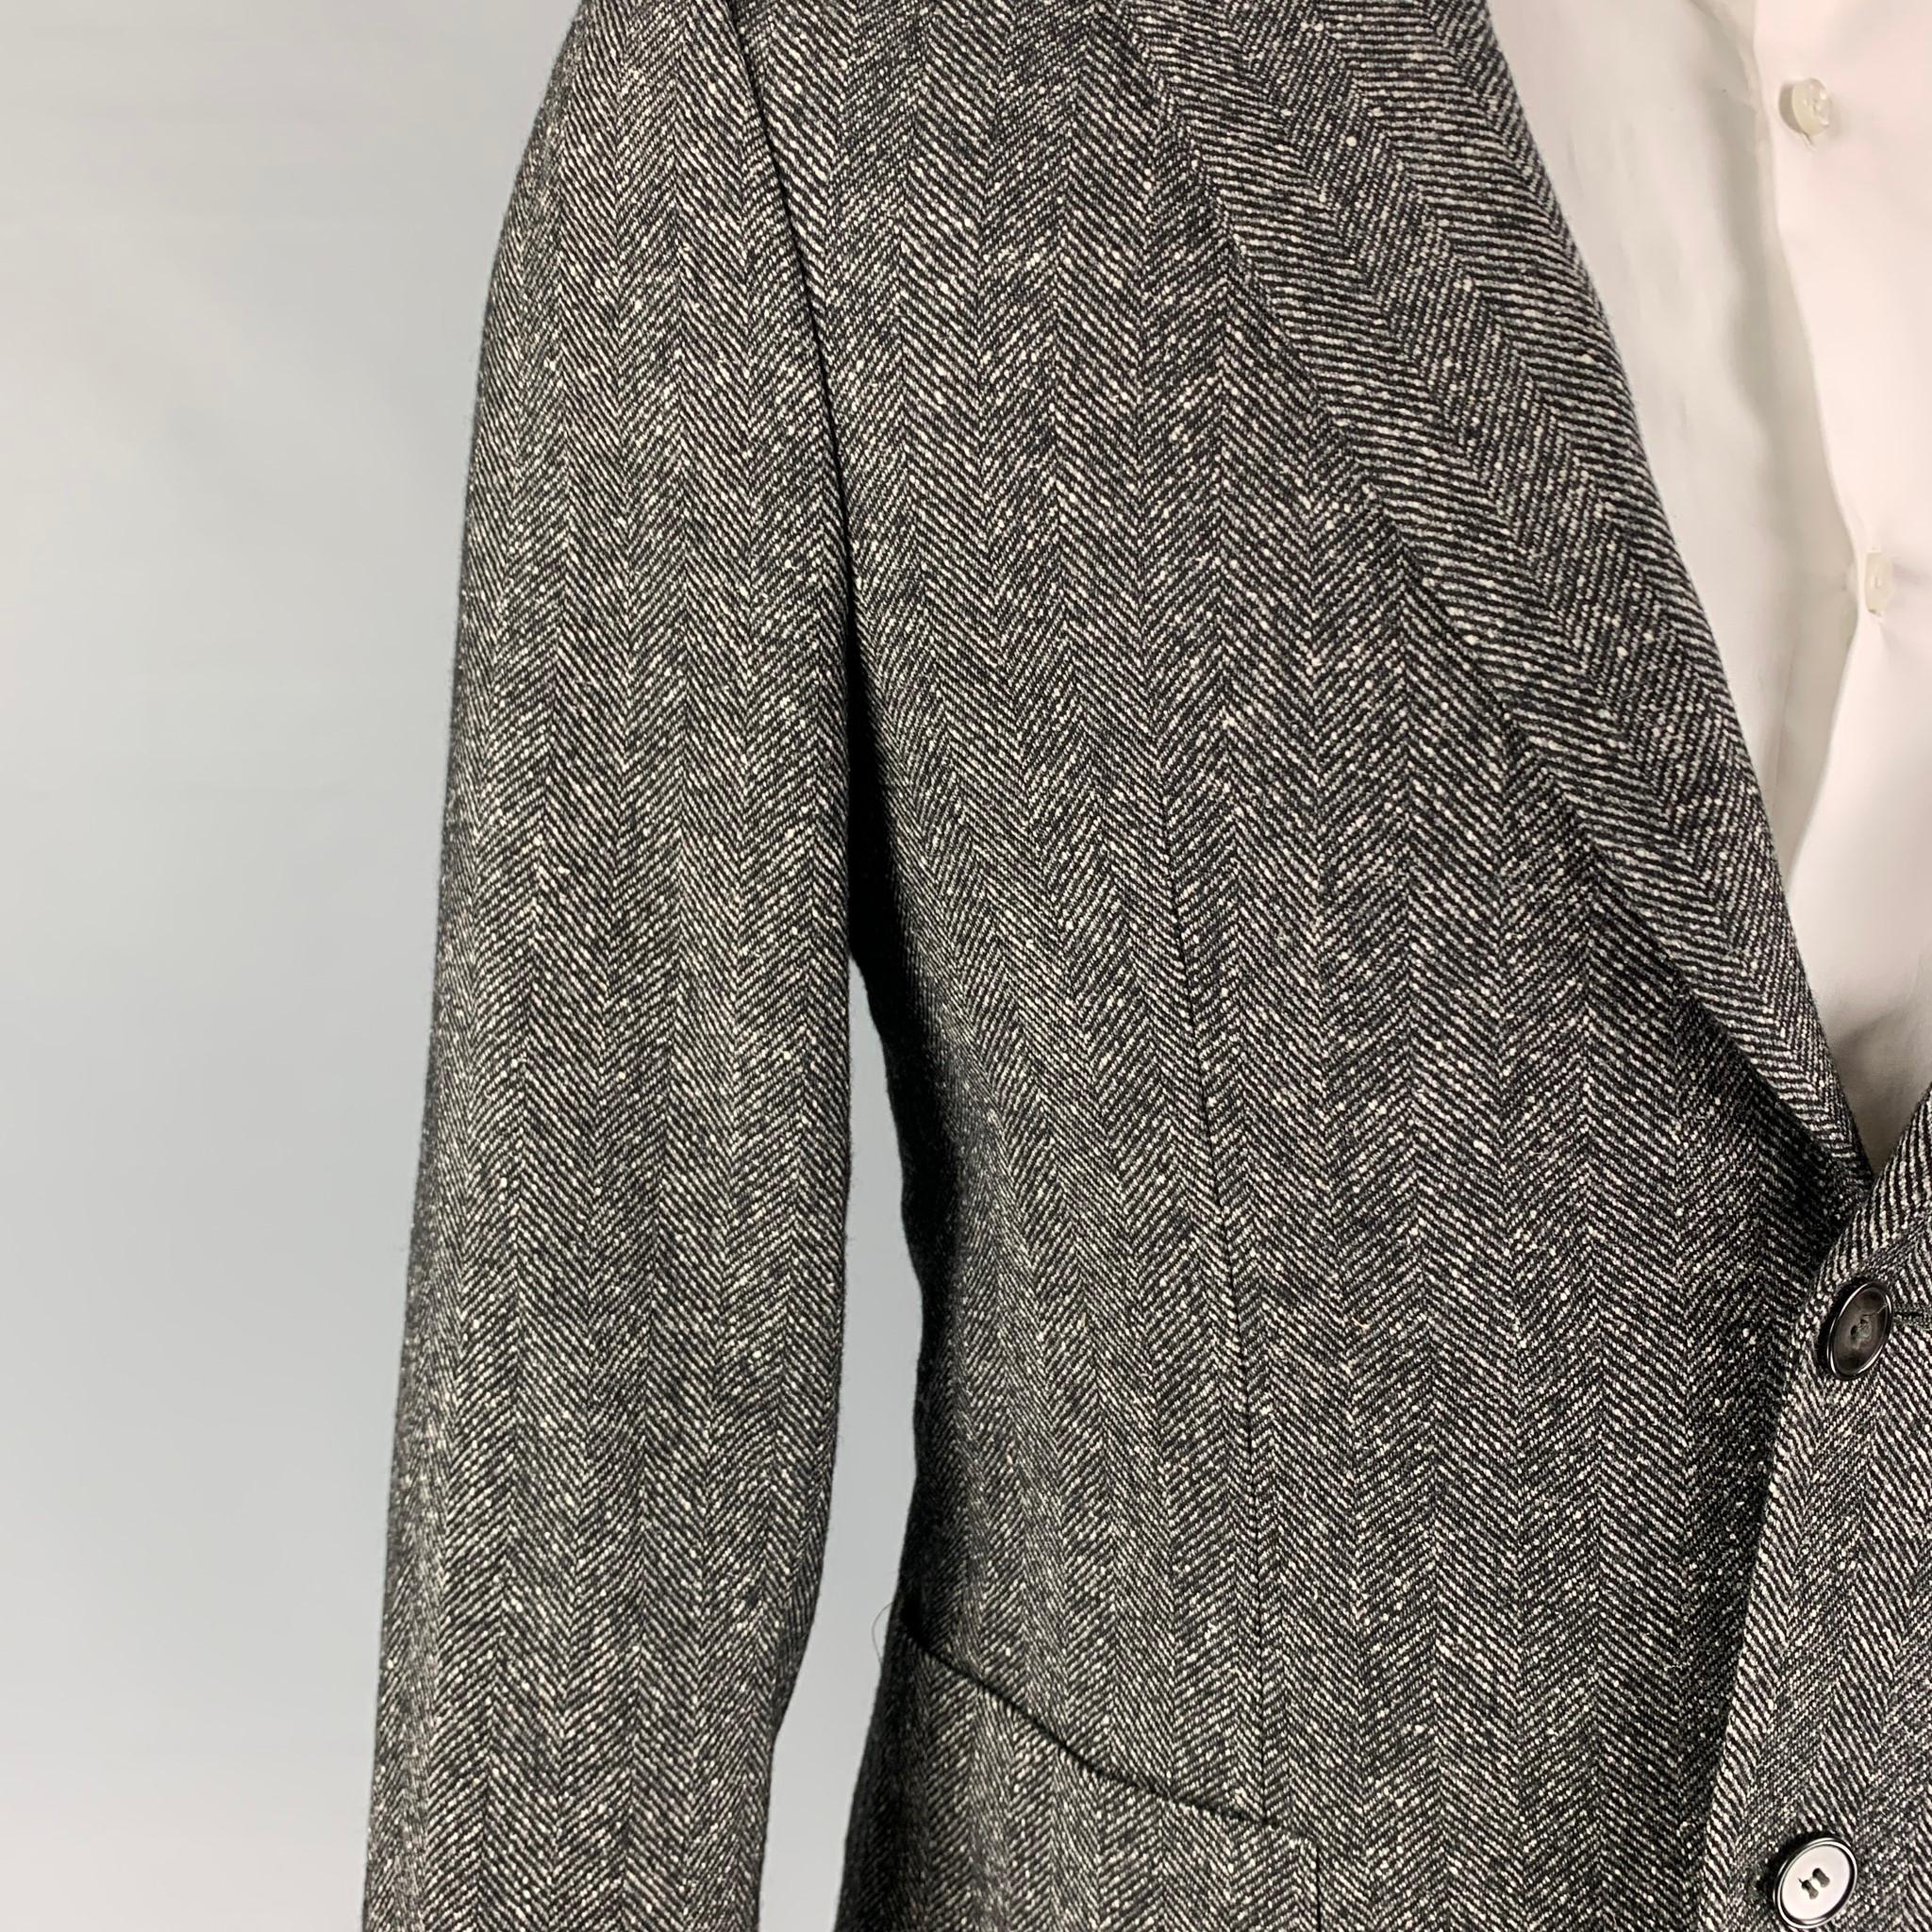 OFFICINE GENERALE sport coat comes in a black & white herringbone wool / silk with a full liner featuring a notch lapel, patch pockets, double back vent, and a double button closure. 

Excellent Pre-Owned Condition.
Marked: